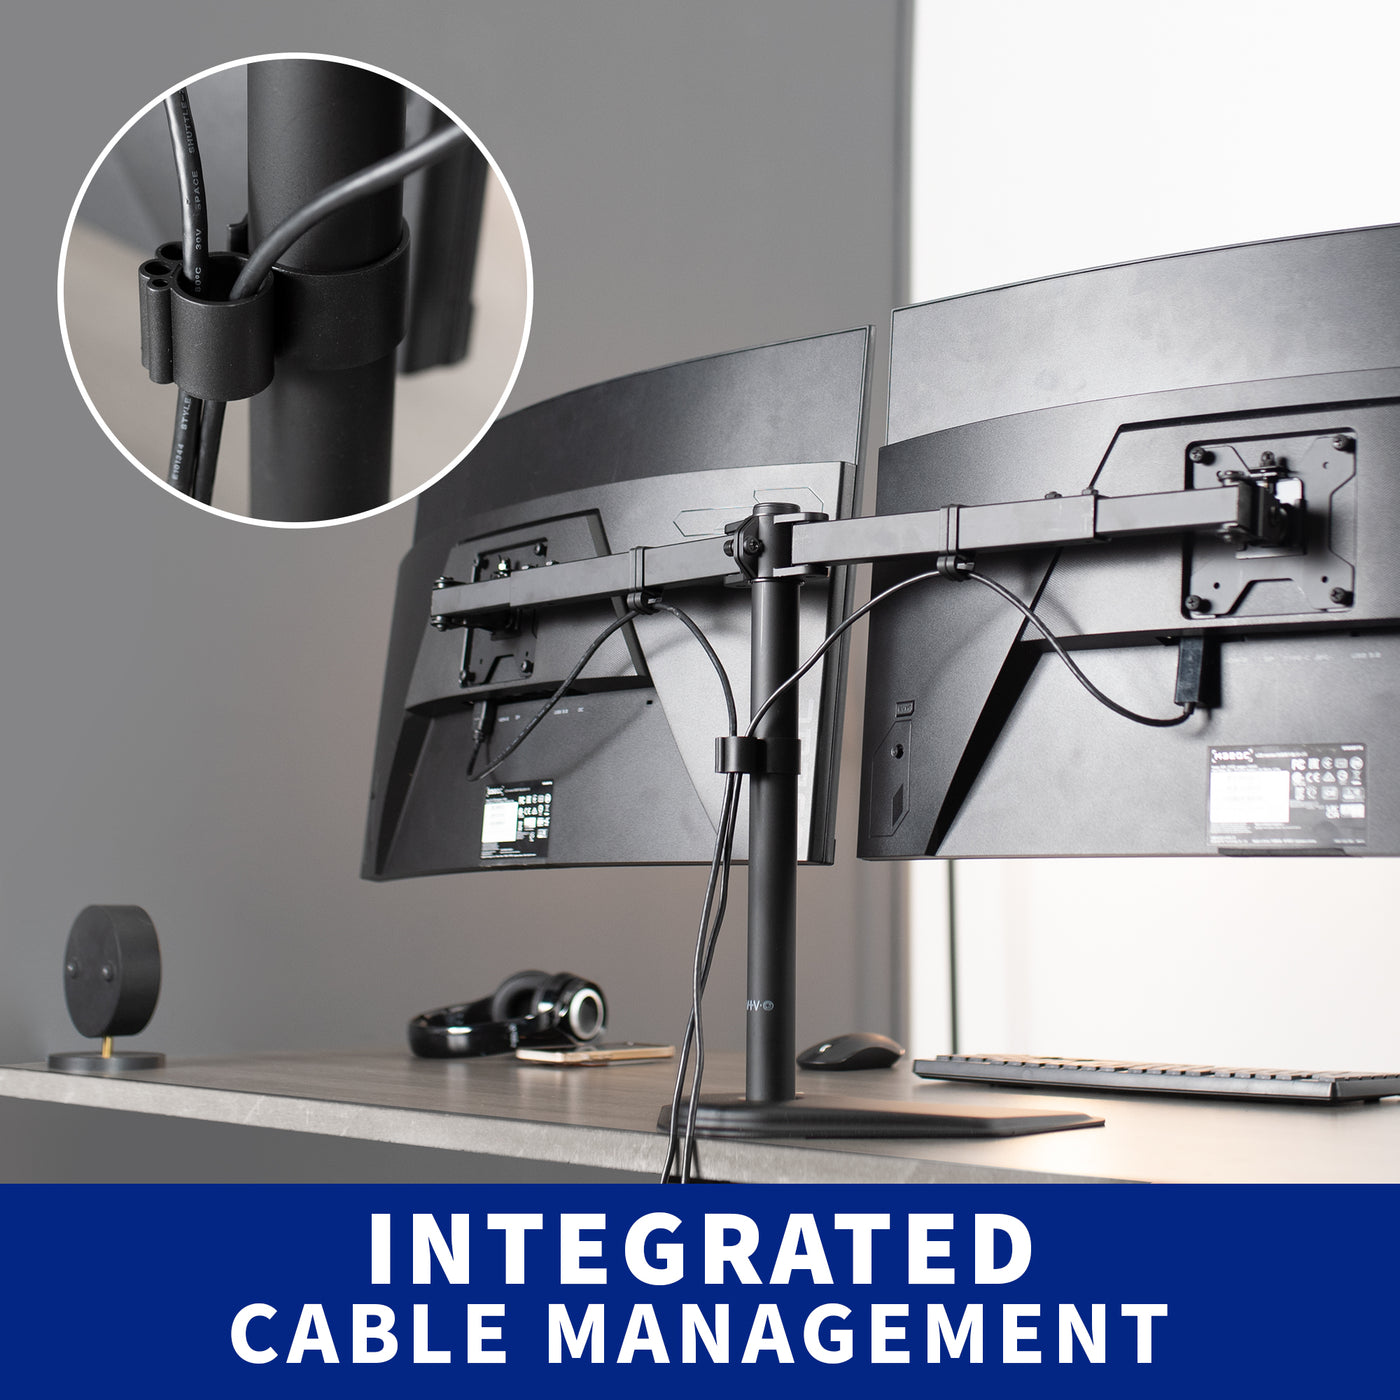 Integrated cable management on the dual monitor mount to maintain an organized workspace.